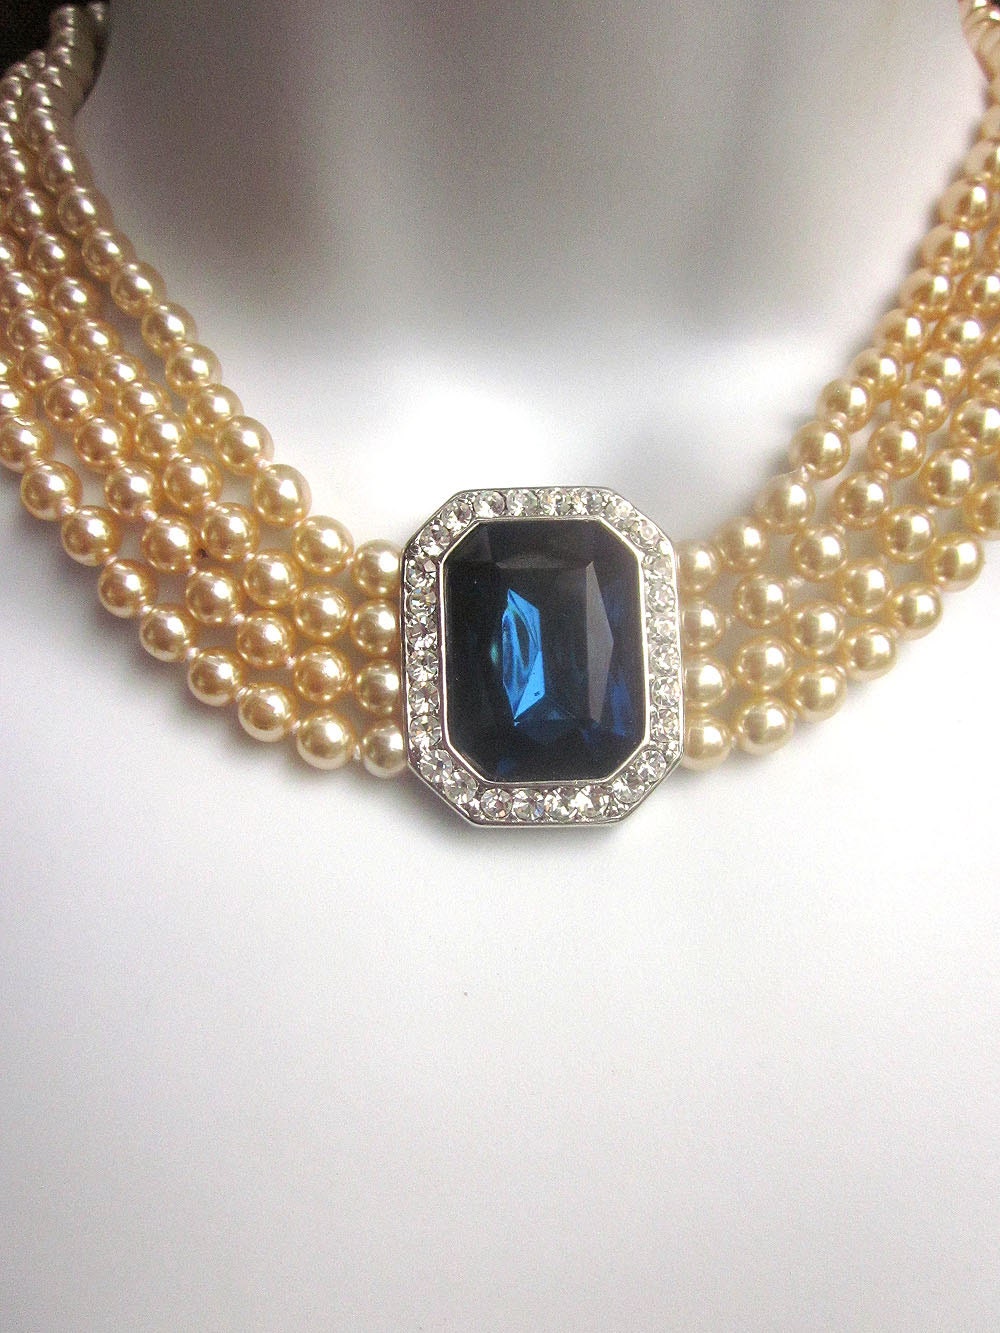 Pearl and Rhinestone Necklace Kenneth Lane Lady Diana Necklace